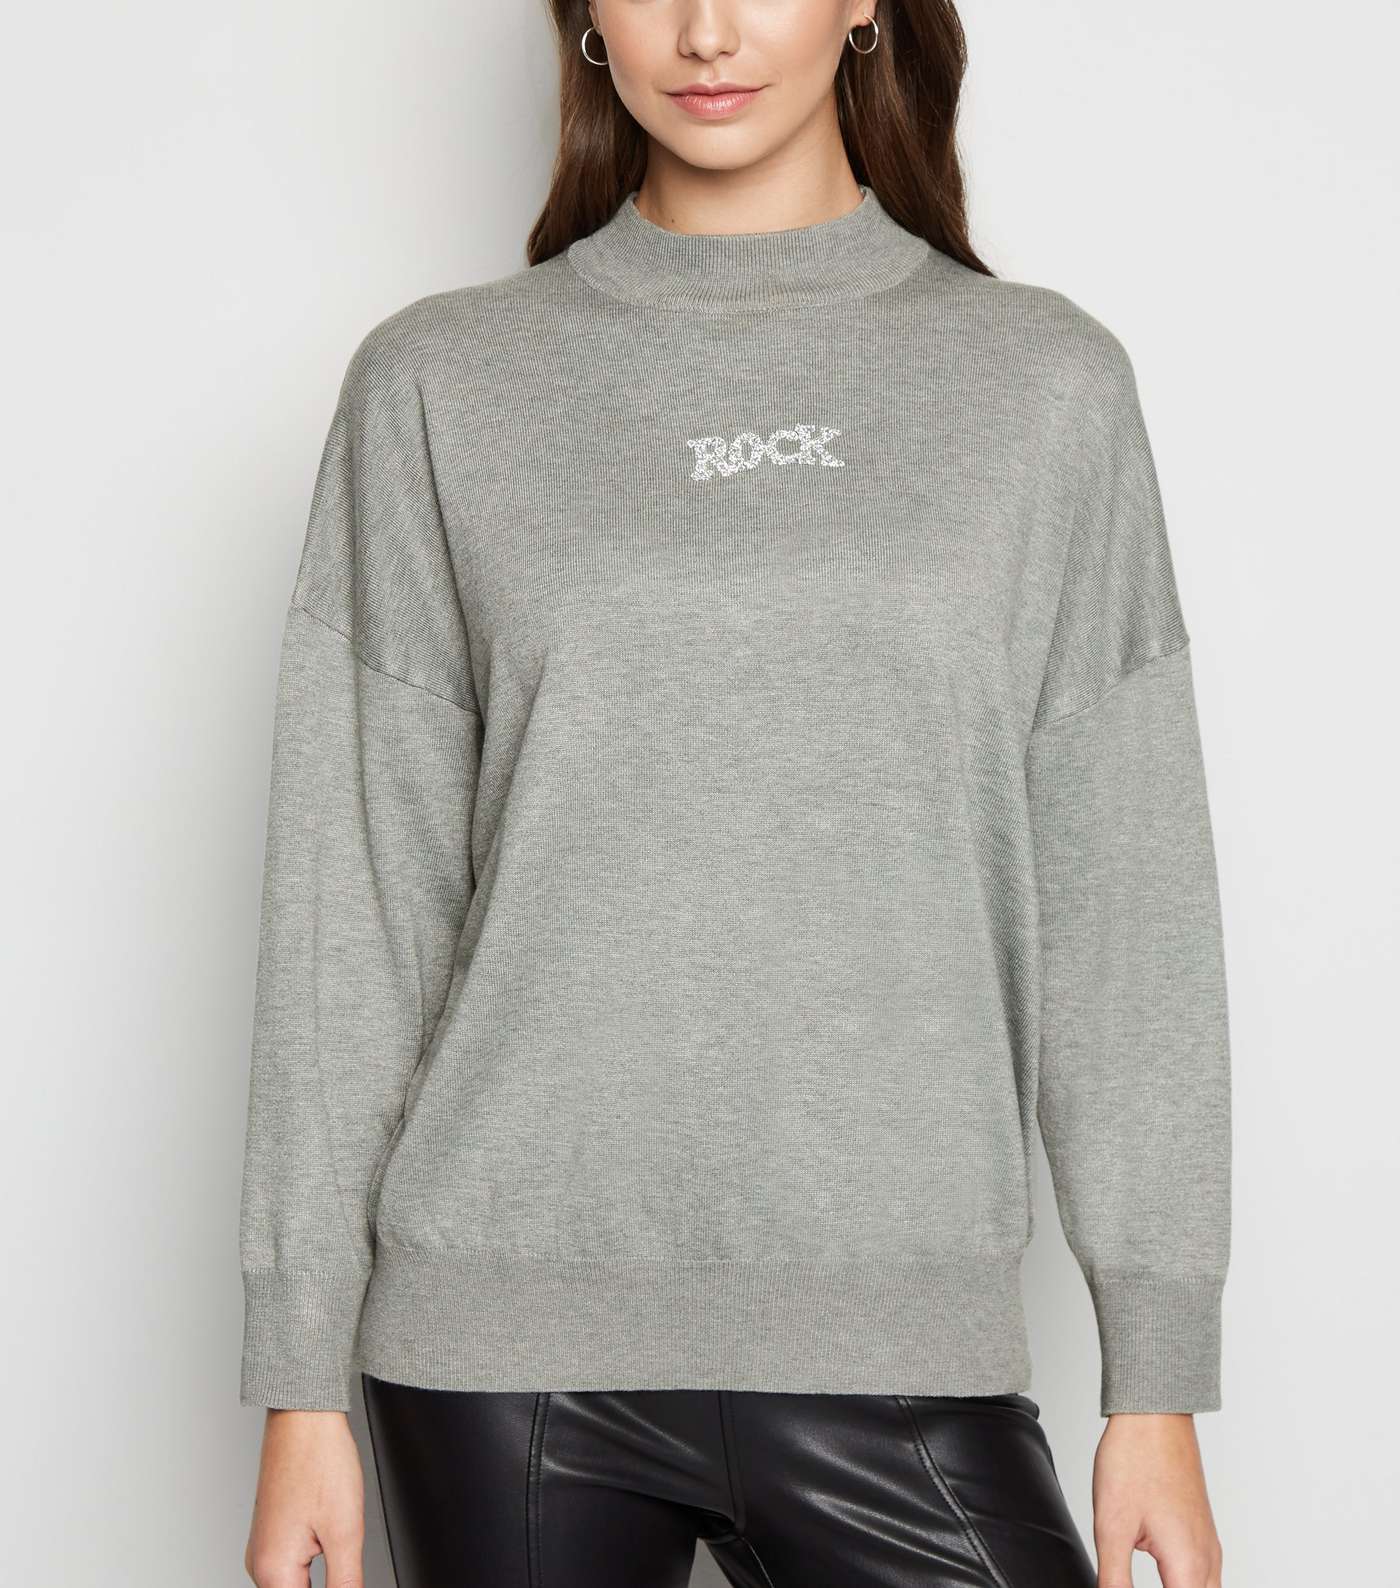 Cameo Rose Grey Rock and Roll Slogan Jumper